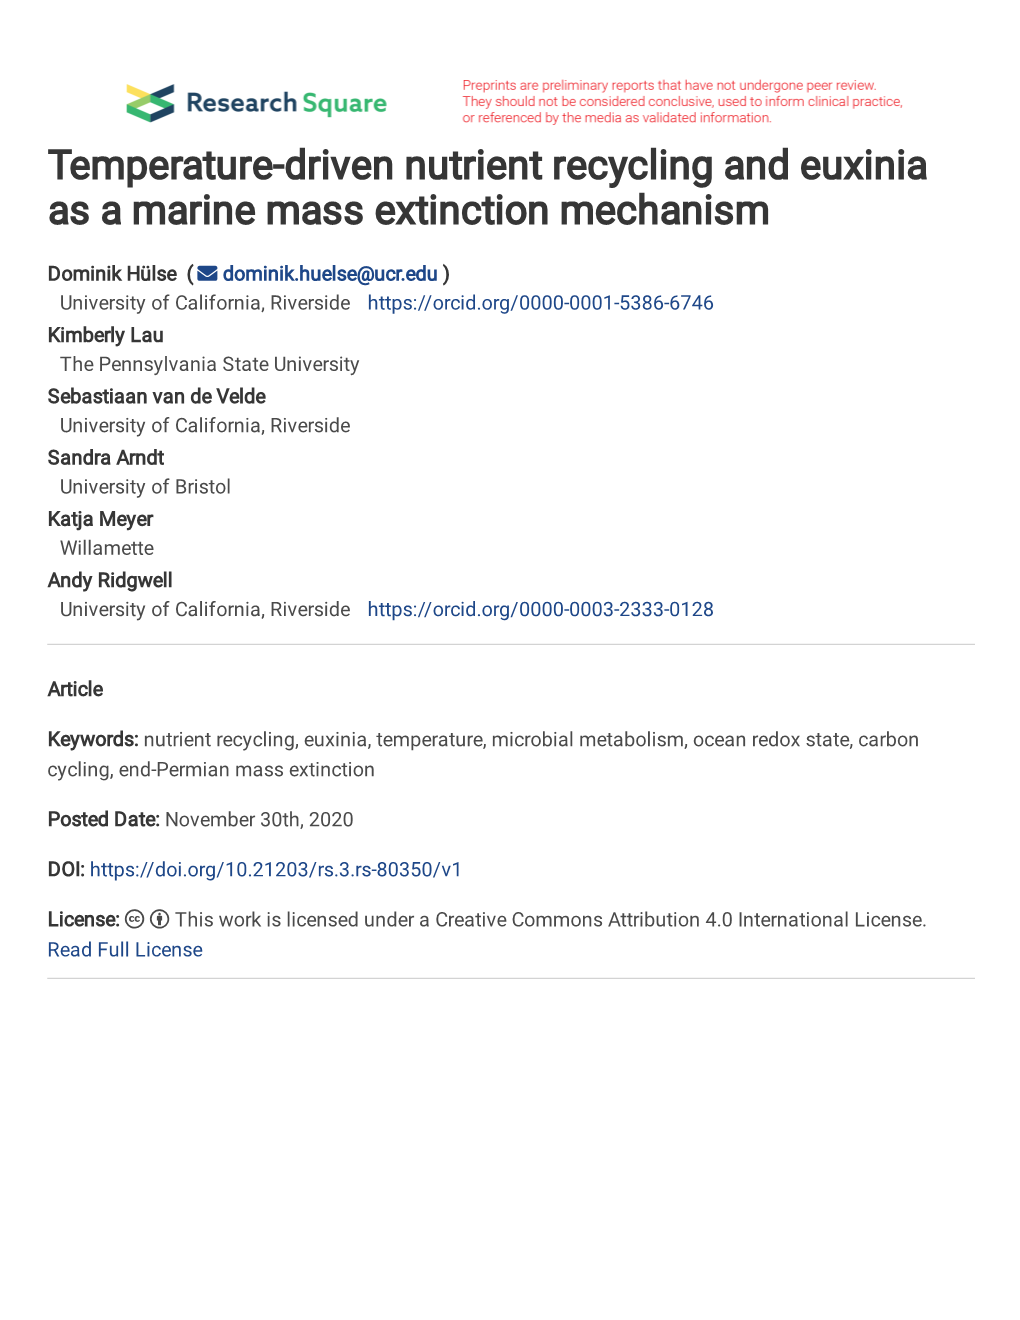 Temperature-Driven Nutrient Recycling and Euxinia As a Marine Mass Extinction Mechanism